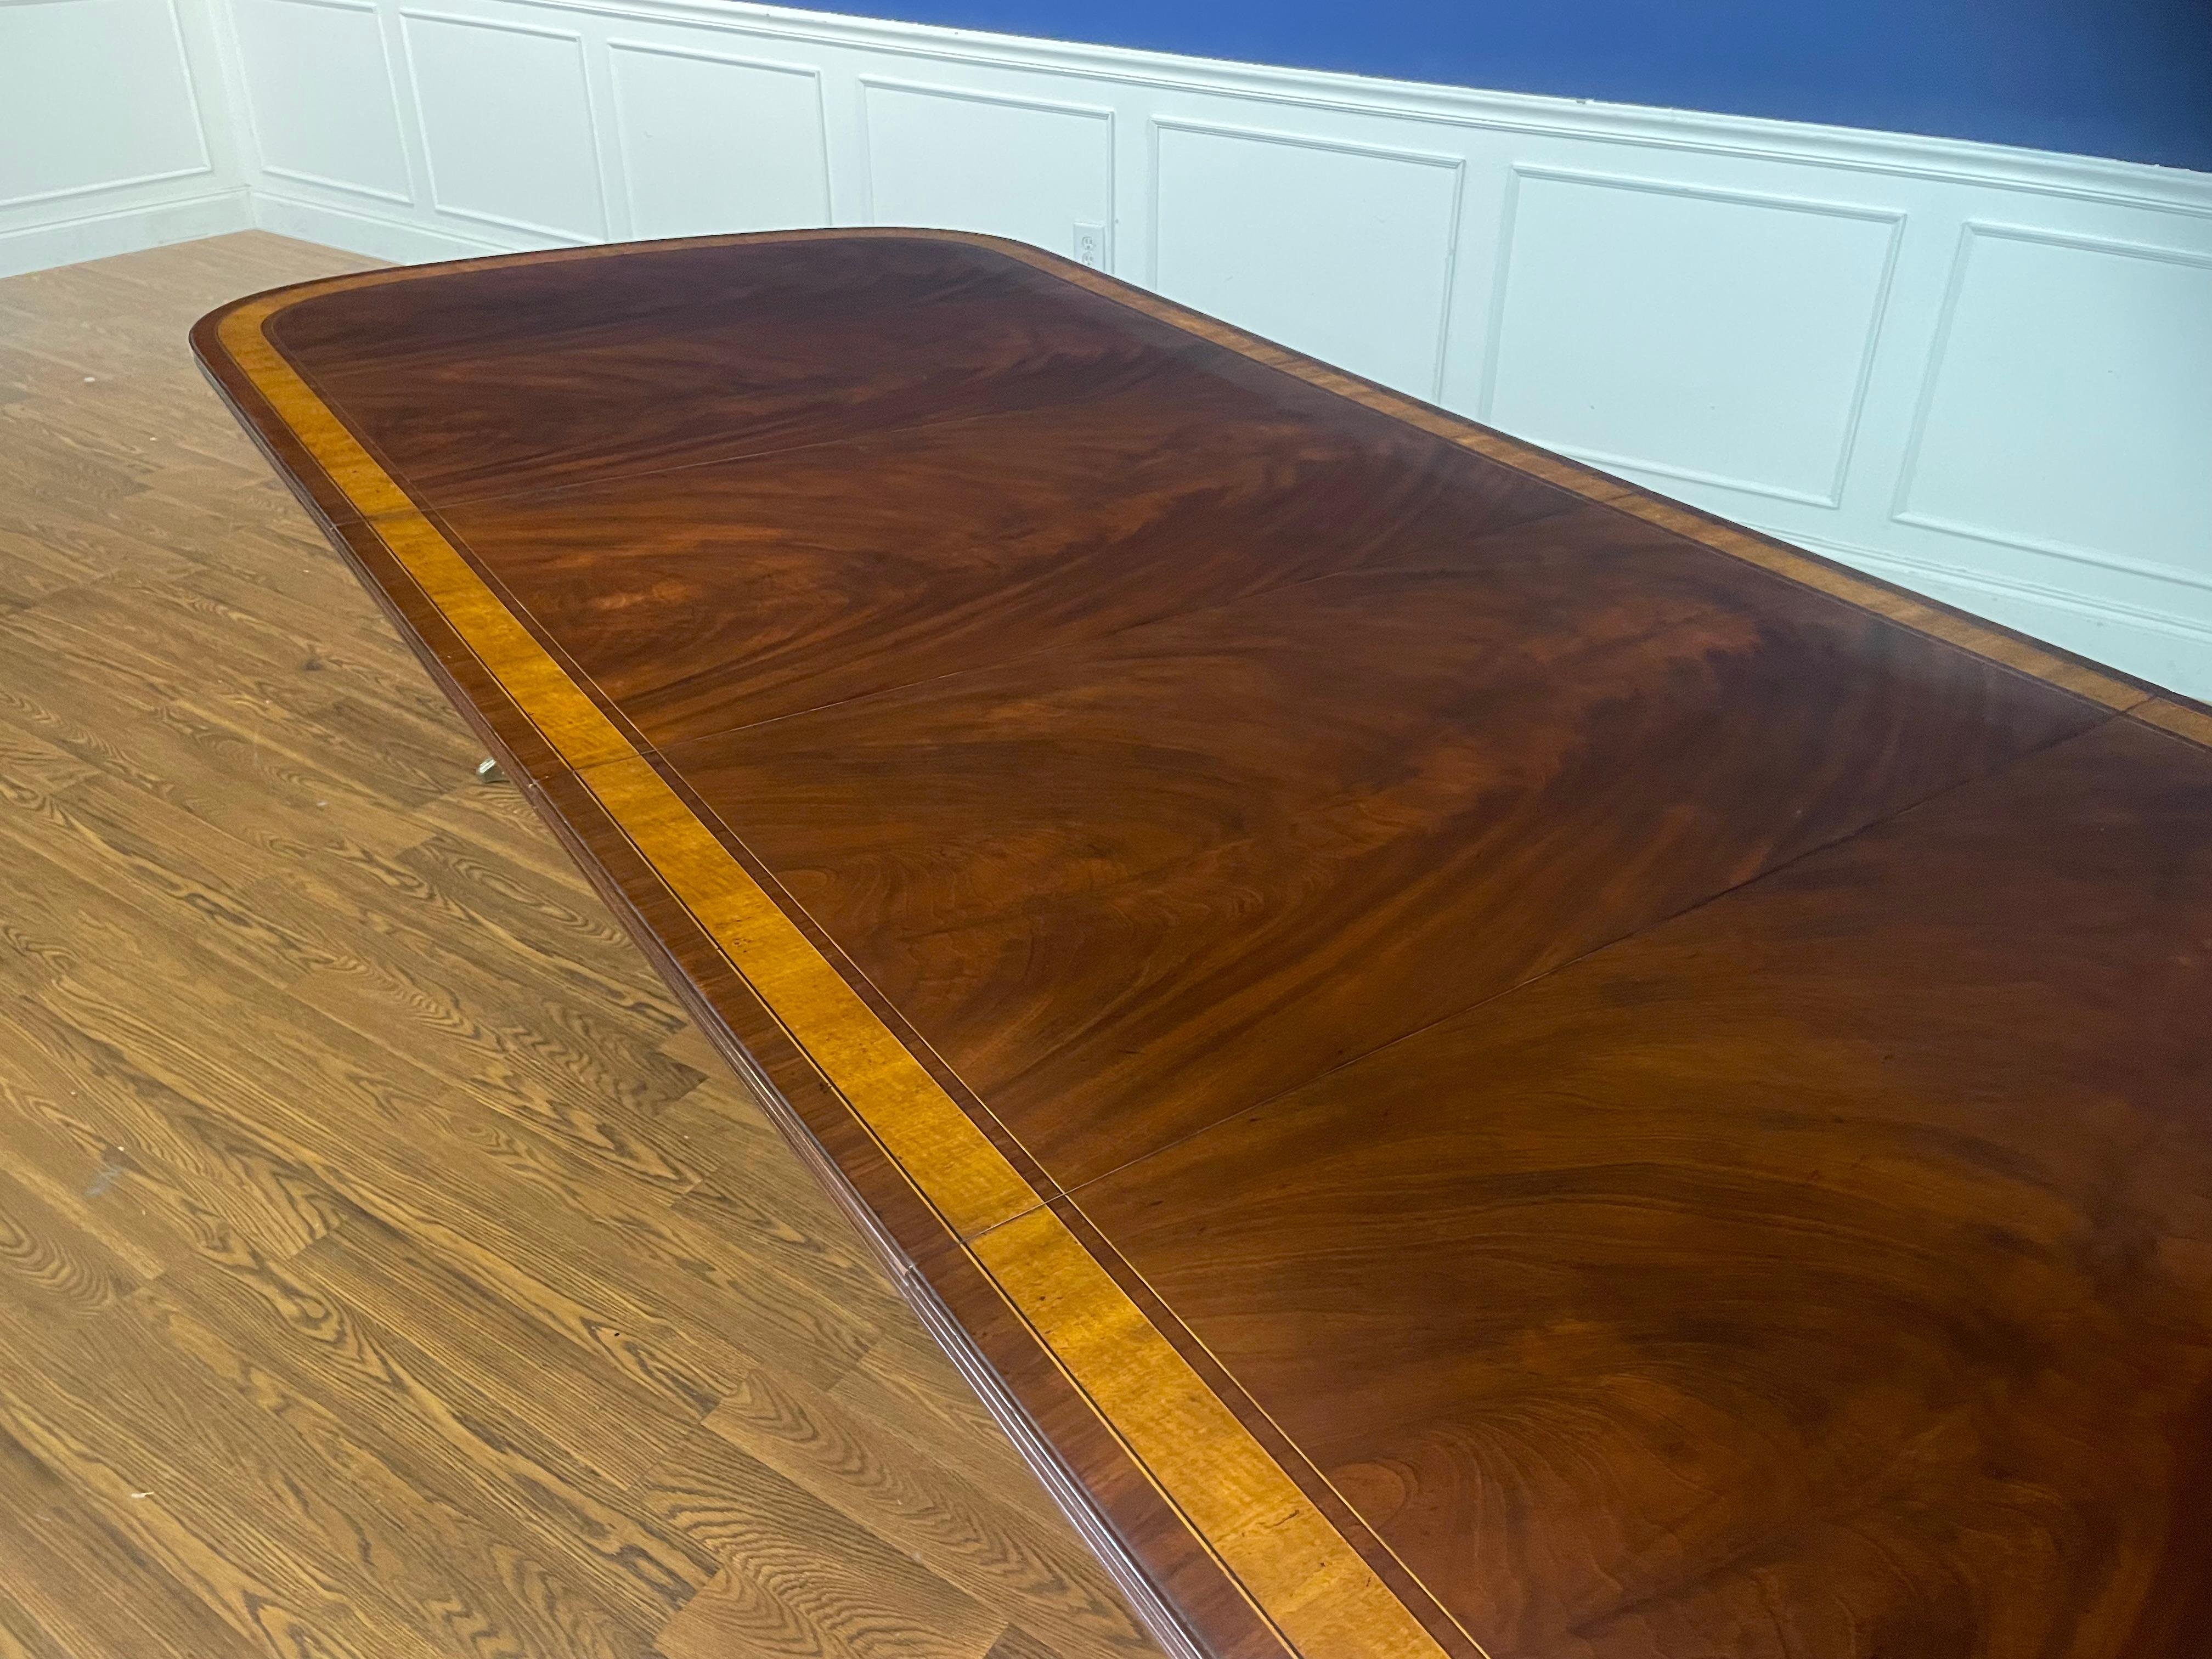 American Traditional Mahogany Dining Table by Leighton Hall - Showroom Sample For Sale